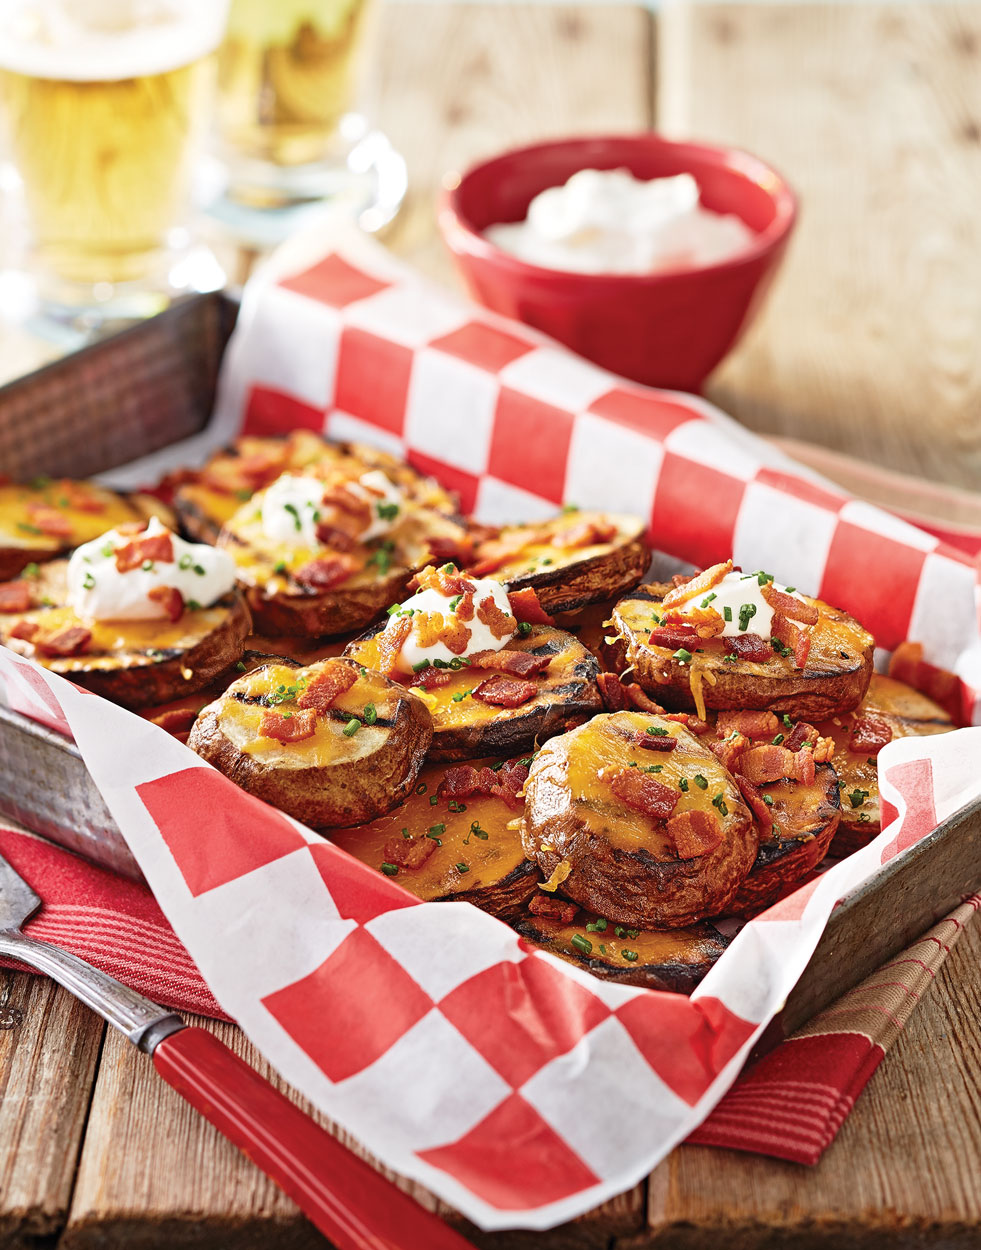 Grilled Potatoes with Bacon & Cheddar